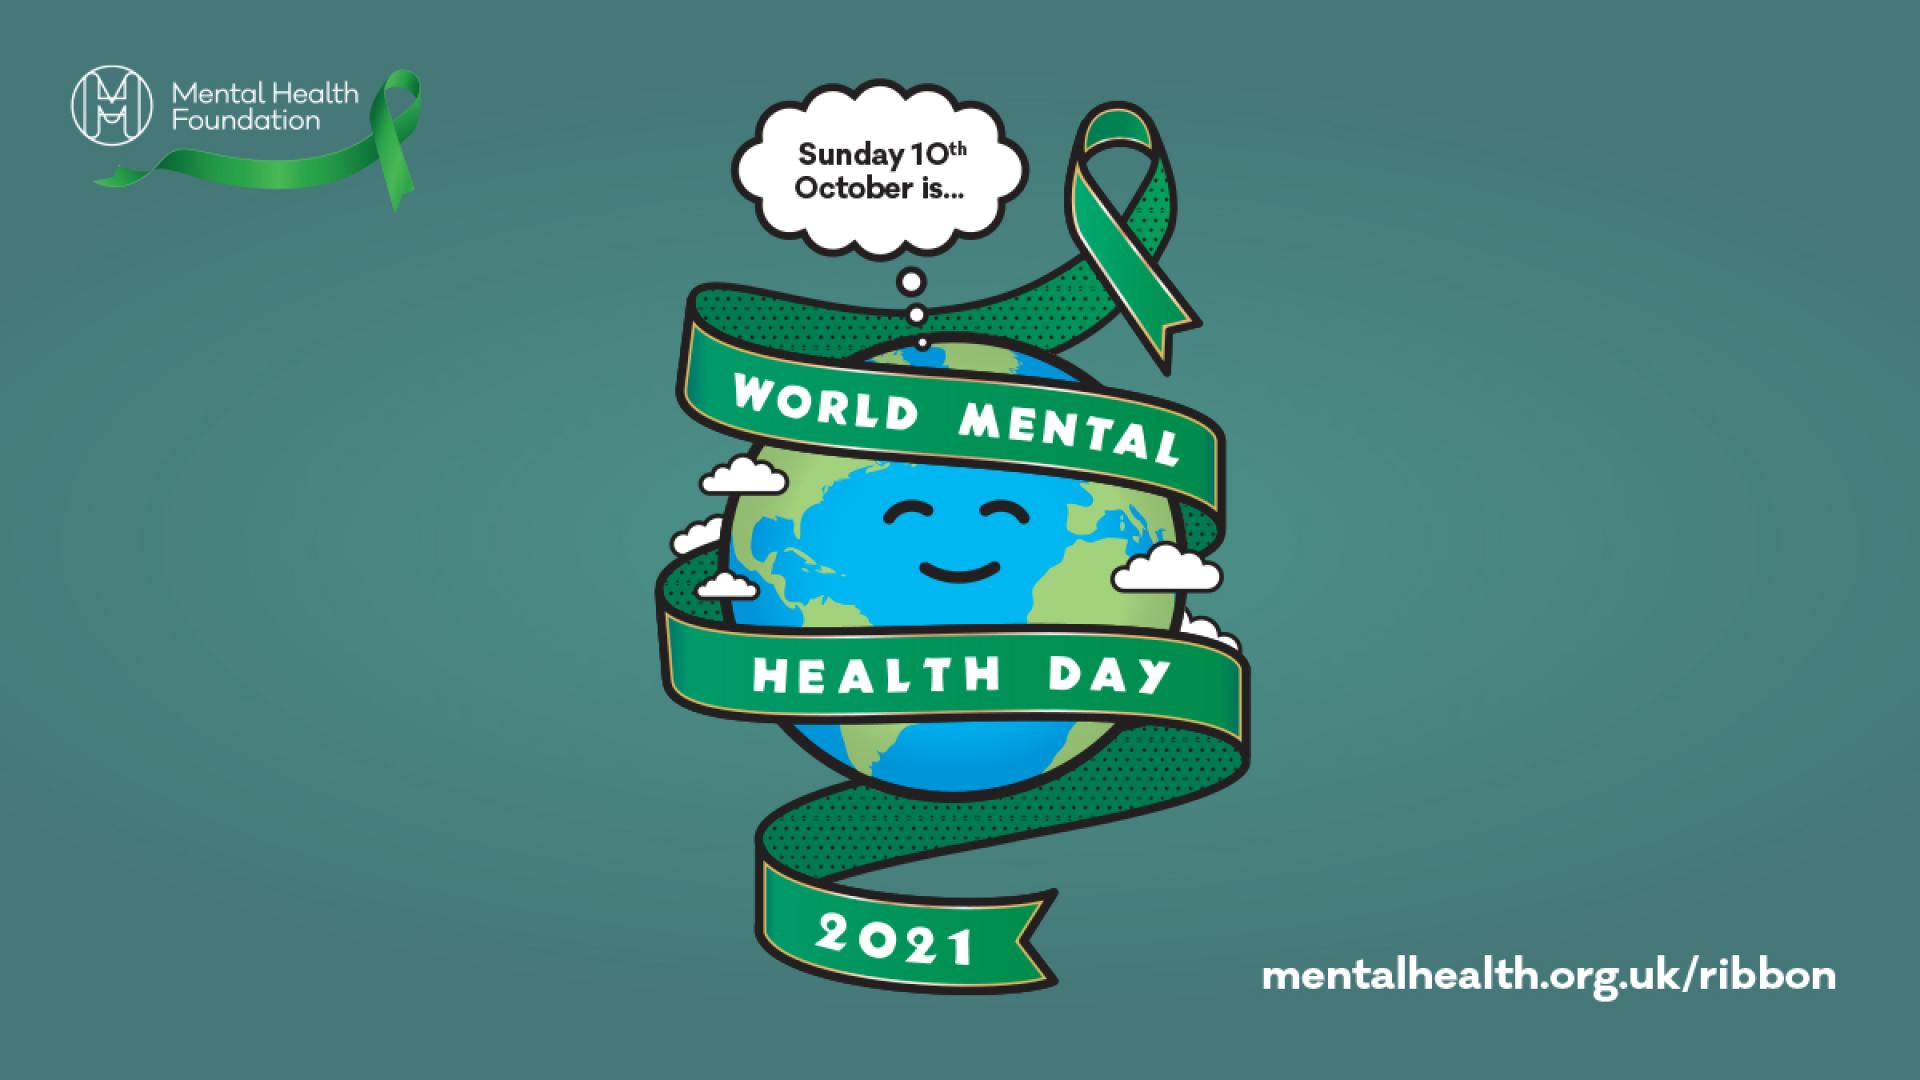 World Mental Health Day graphic with green ribbon wrapped around planet Earth